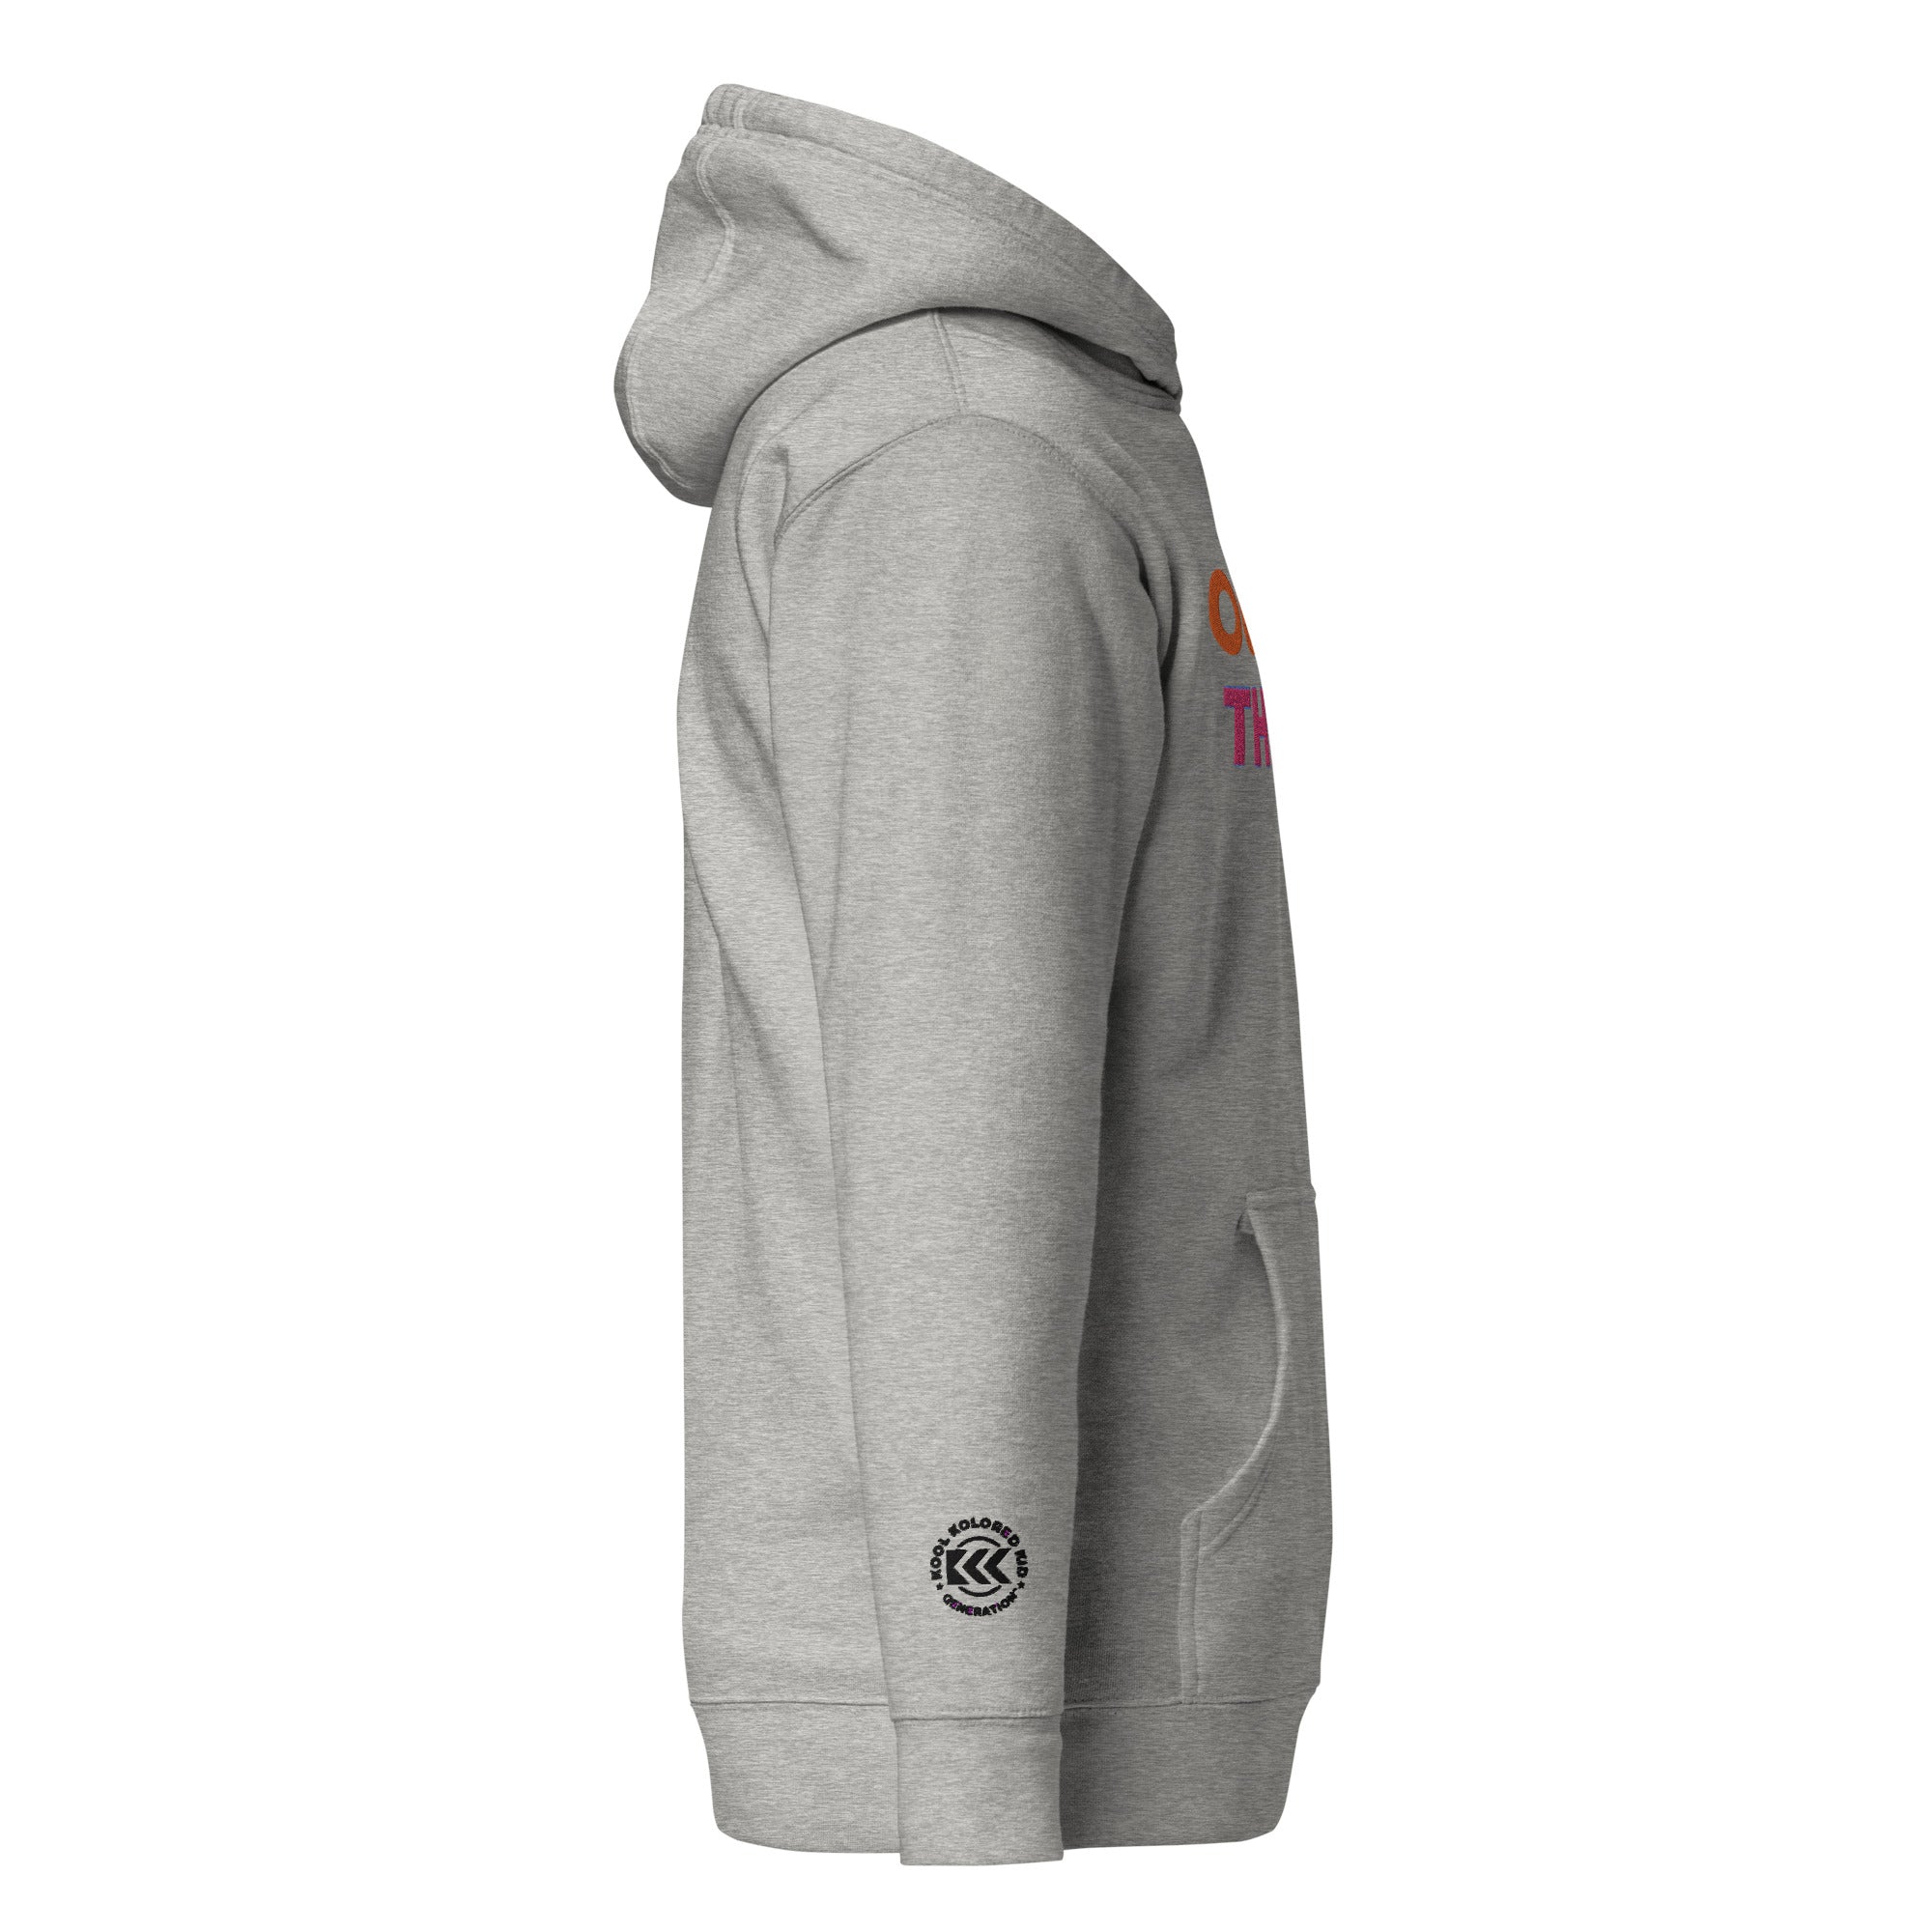 Outside The Box Embroidered Hoodie